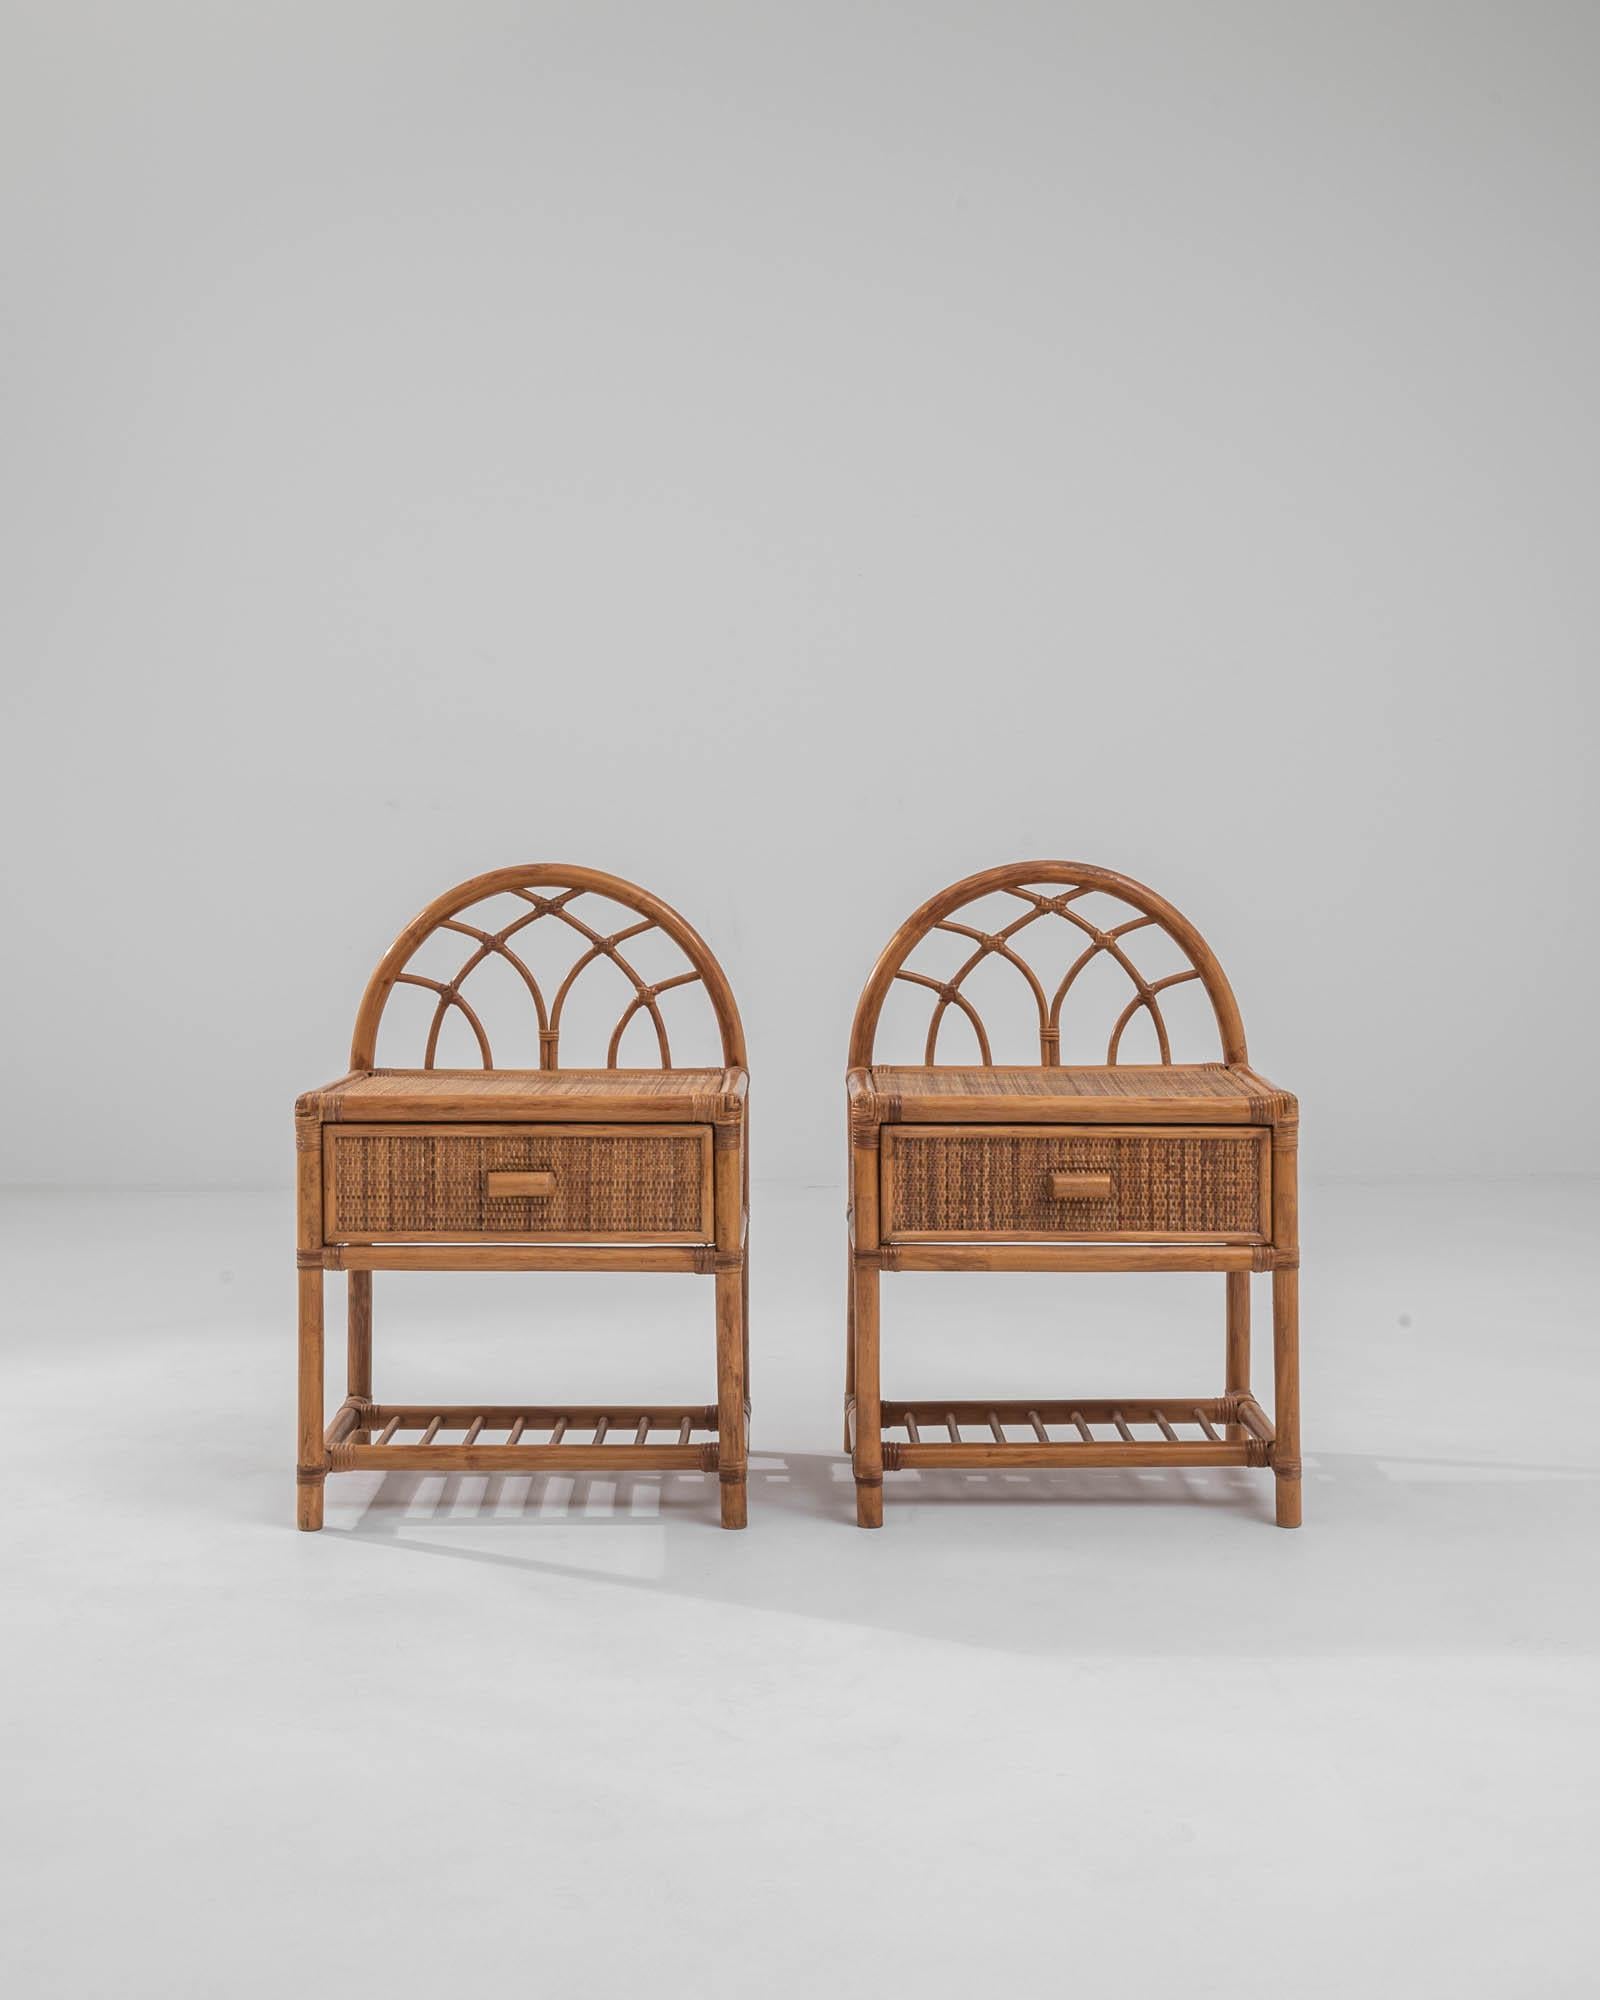 A pair of bedside tables made in France circa 1900. Curved rattan backs, interwoven with smaller vines, compose a graceful backdrop to the flat woven wicker drawers that adorn these delightful tables. Hand-woven wicker and neatly tied lashings